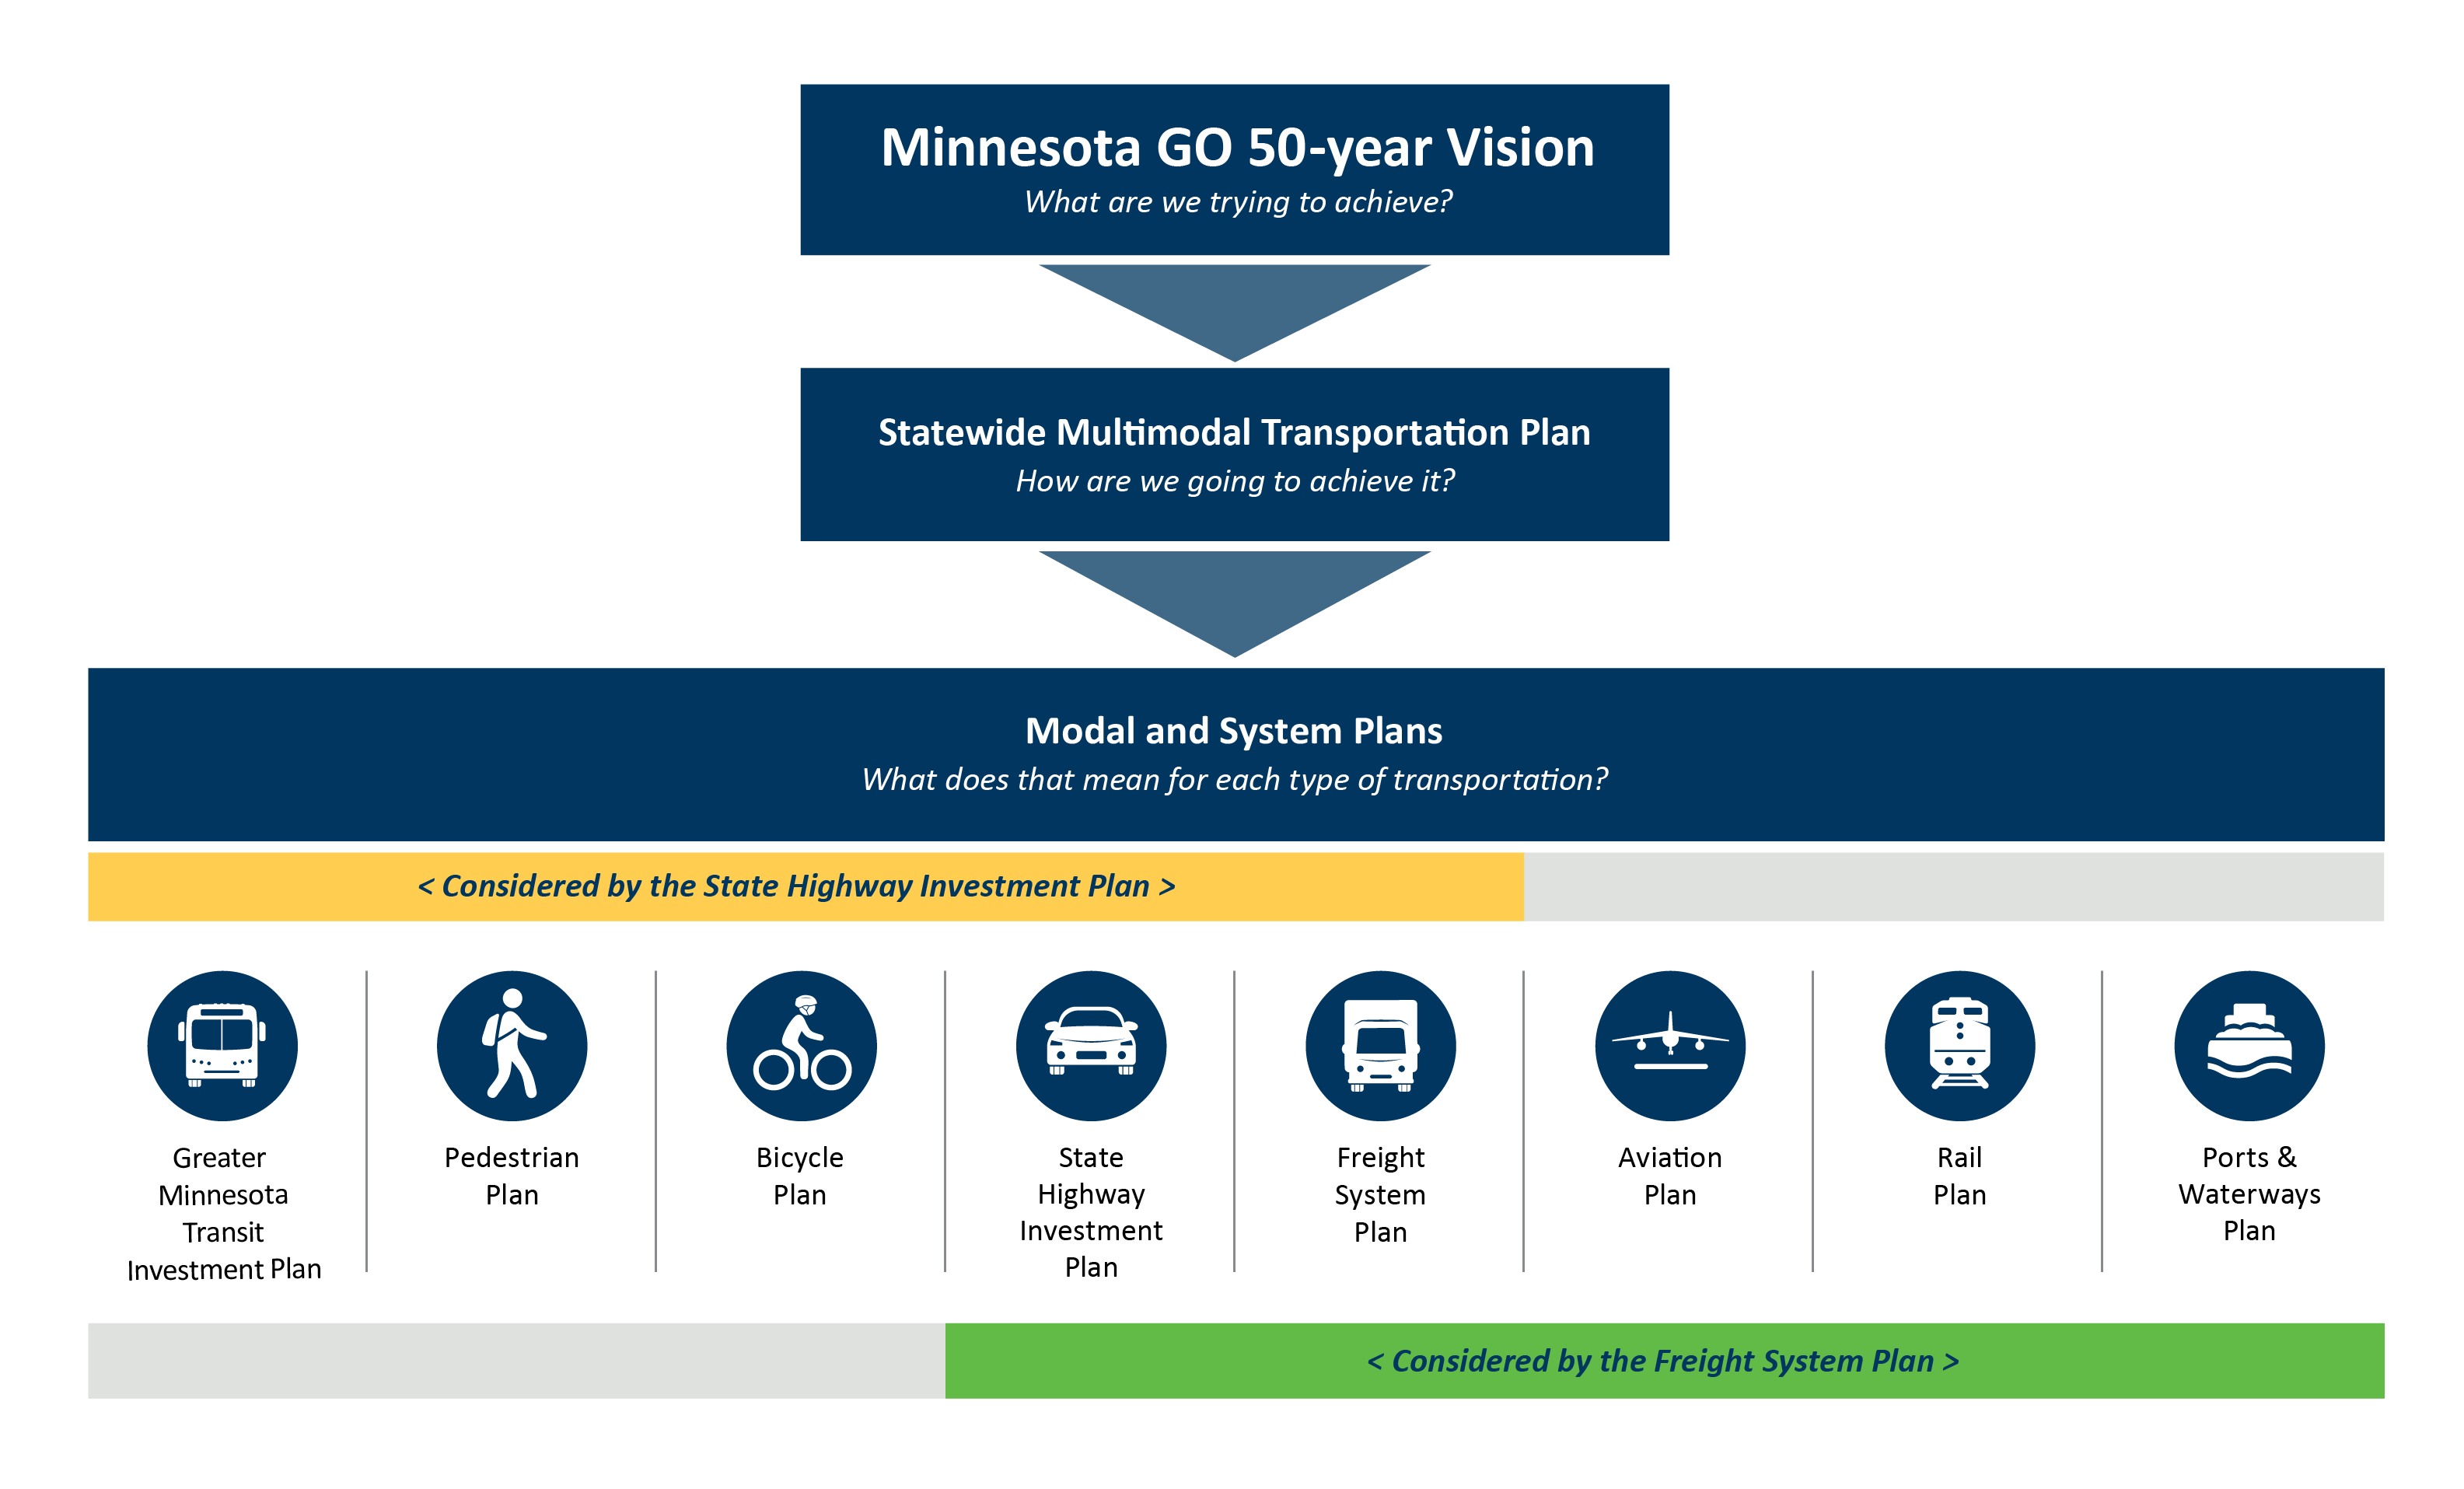 The Minnesota GO planning framework starts with the Minnesota GO Vision. Adopted in 2011, the Vision established eight guiding principles to move toward a multimodal transportation system that maximizes the health of people, the environment and the economy. These principles are to be used collectively and are intended to guide policy and investment direction.